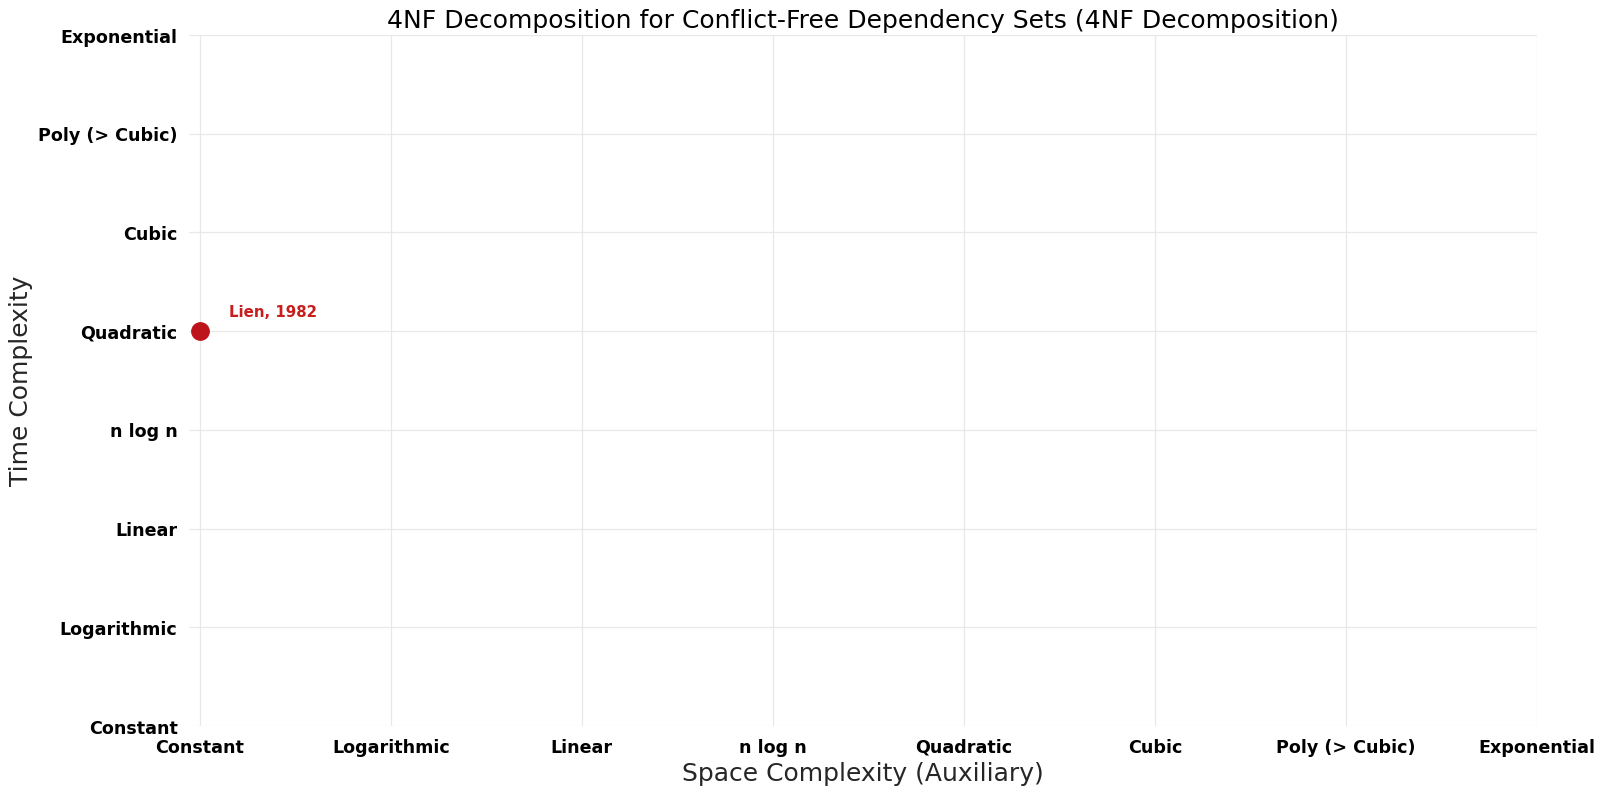 4NF Decomposition - 4NF Decomposition for Conflict-Free Dependency Sets - Pareto Frontier.png